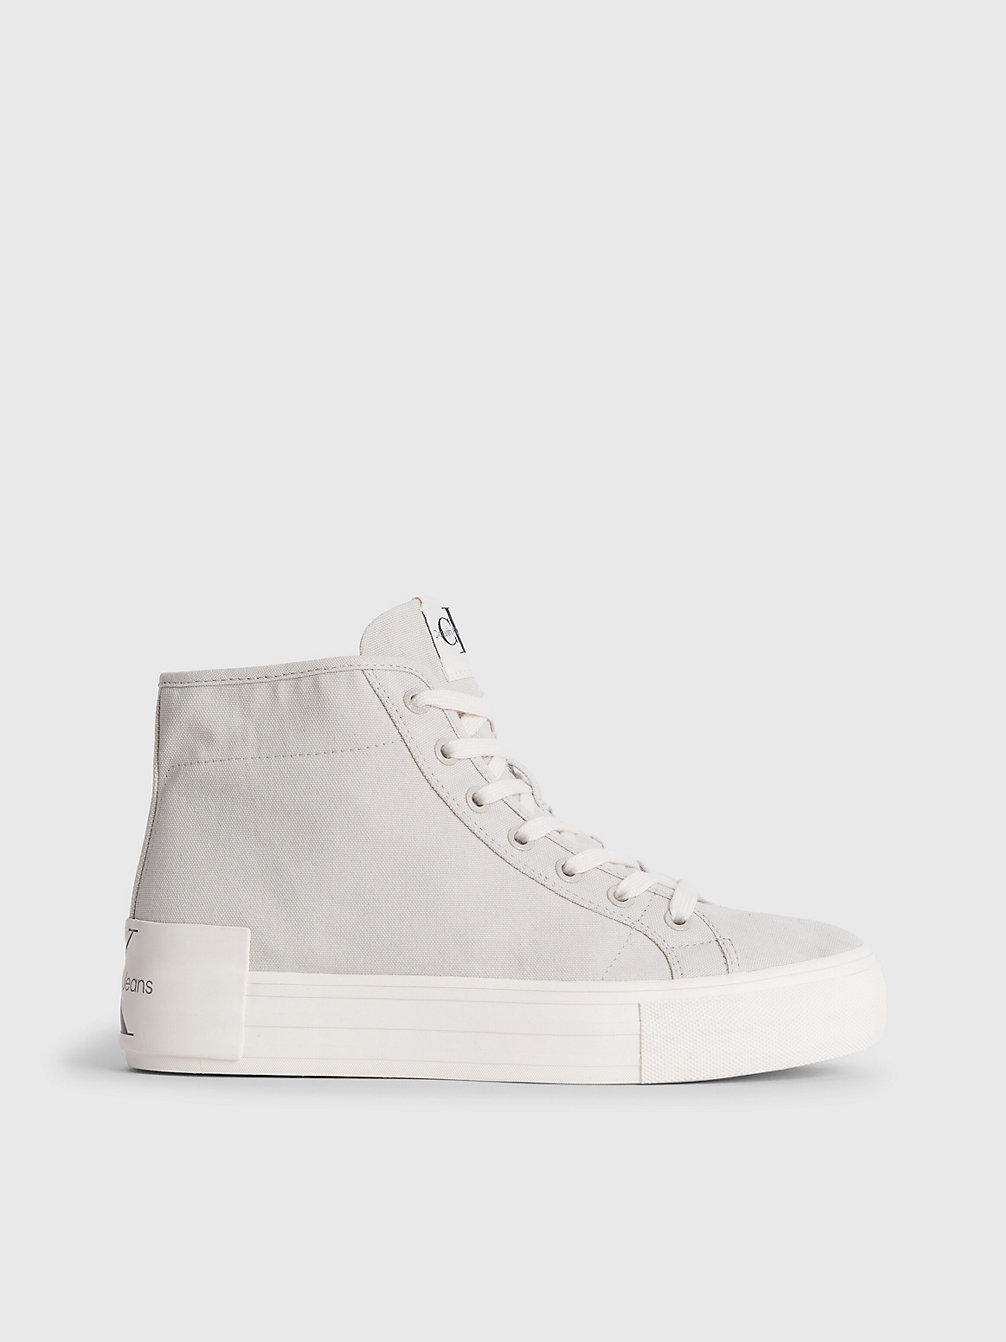 EGGSHELL Recycled High-Top Platform Trainers undefined women Calvin Klein